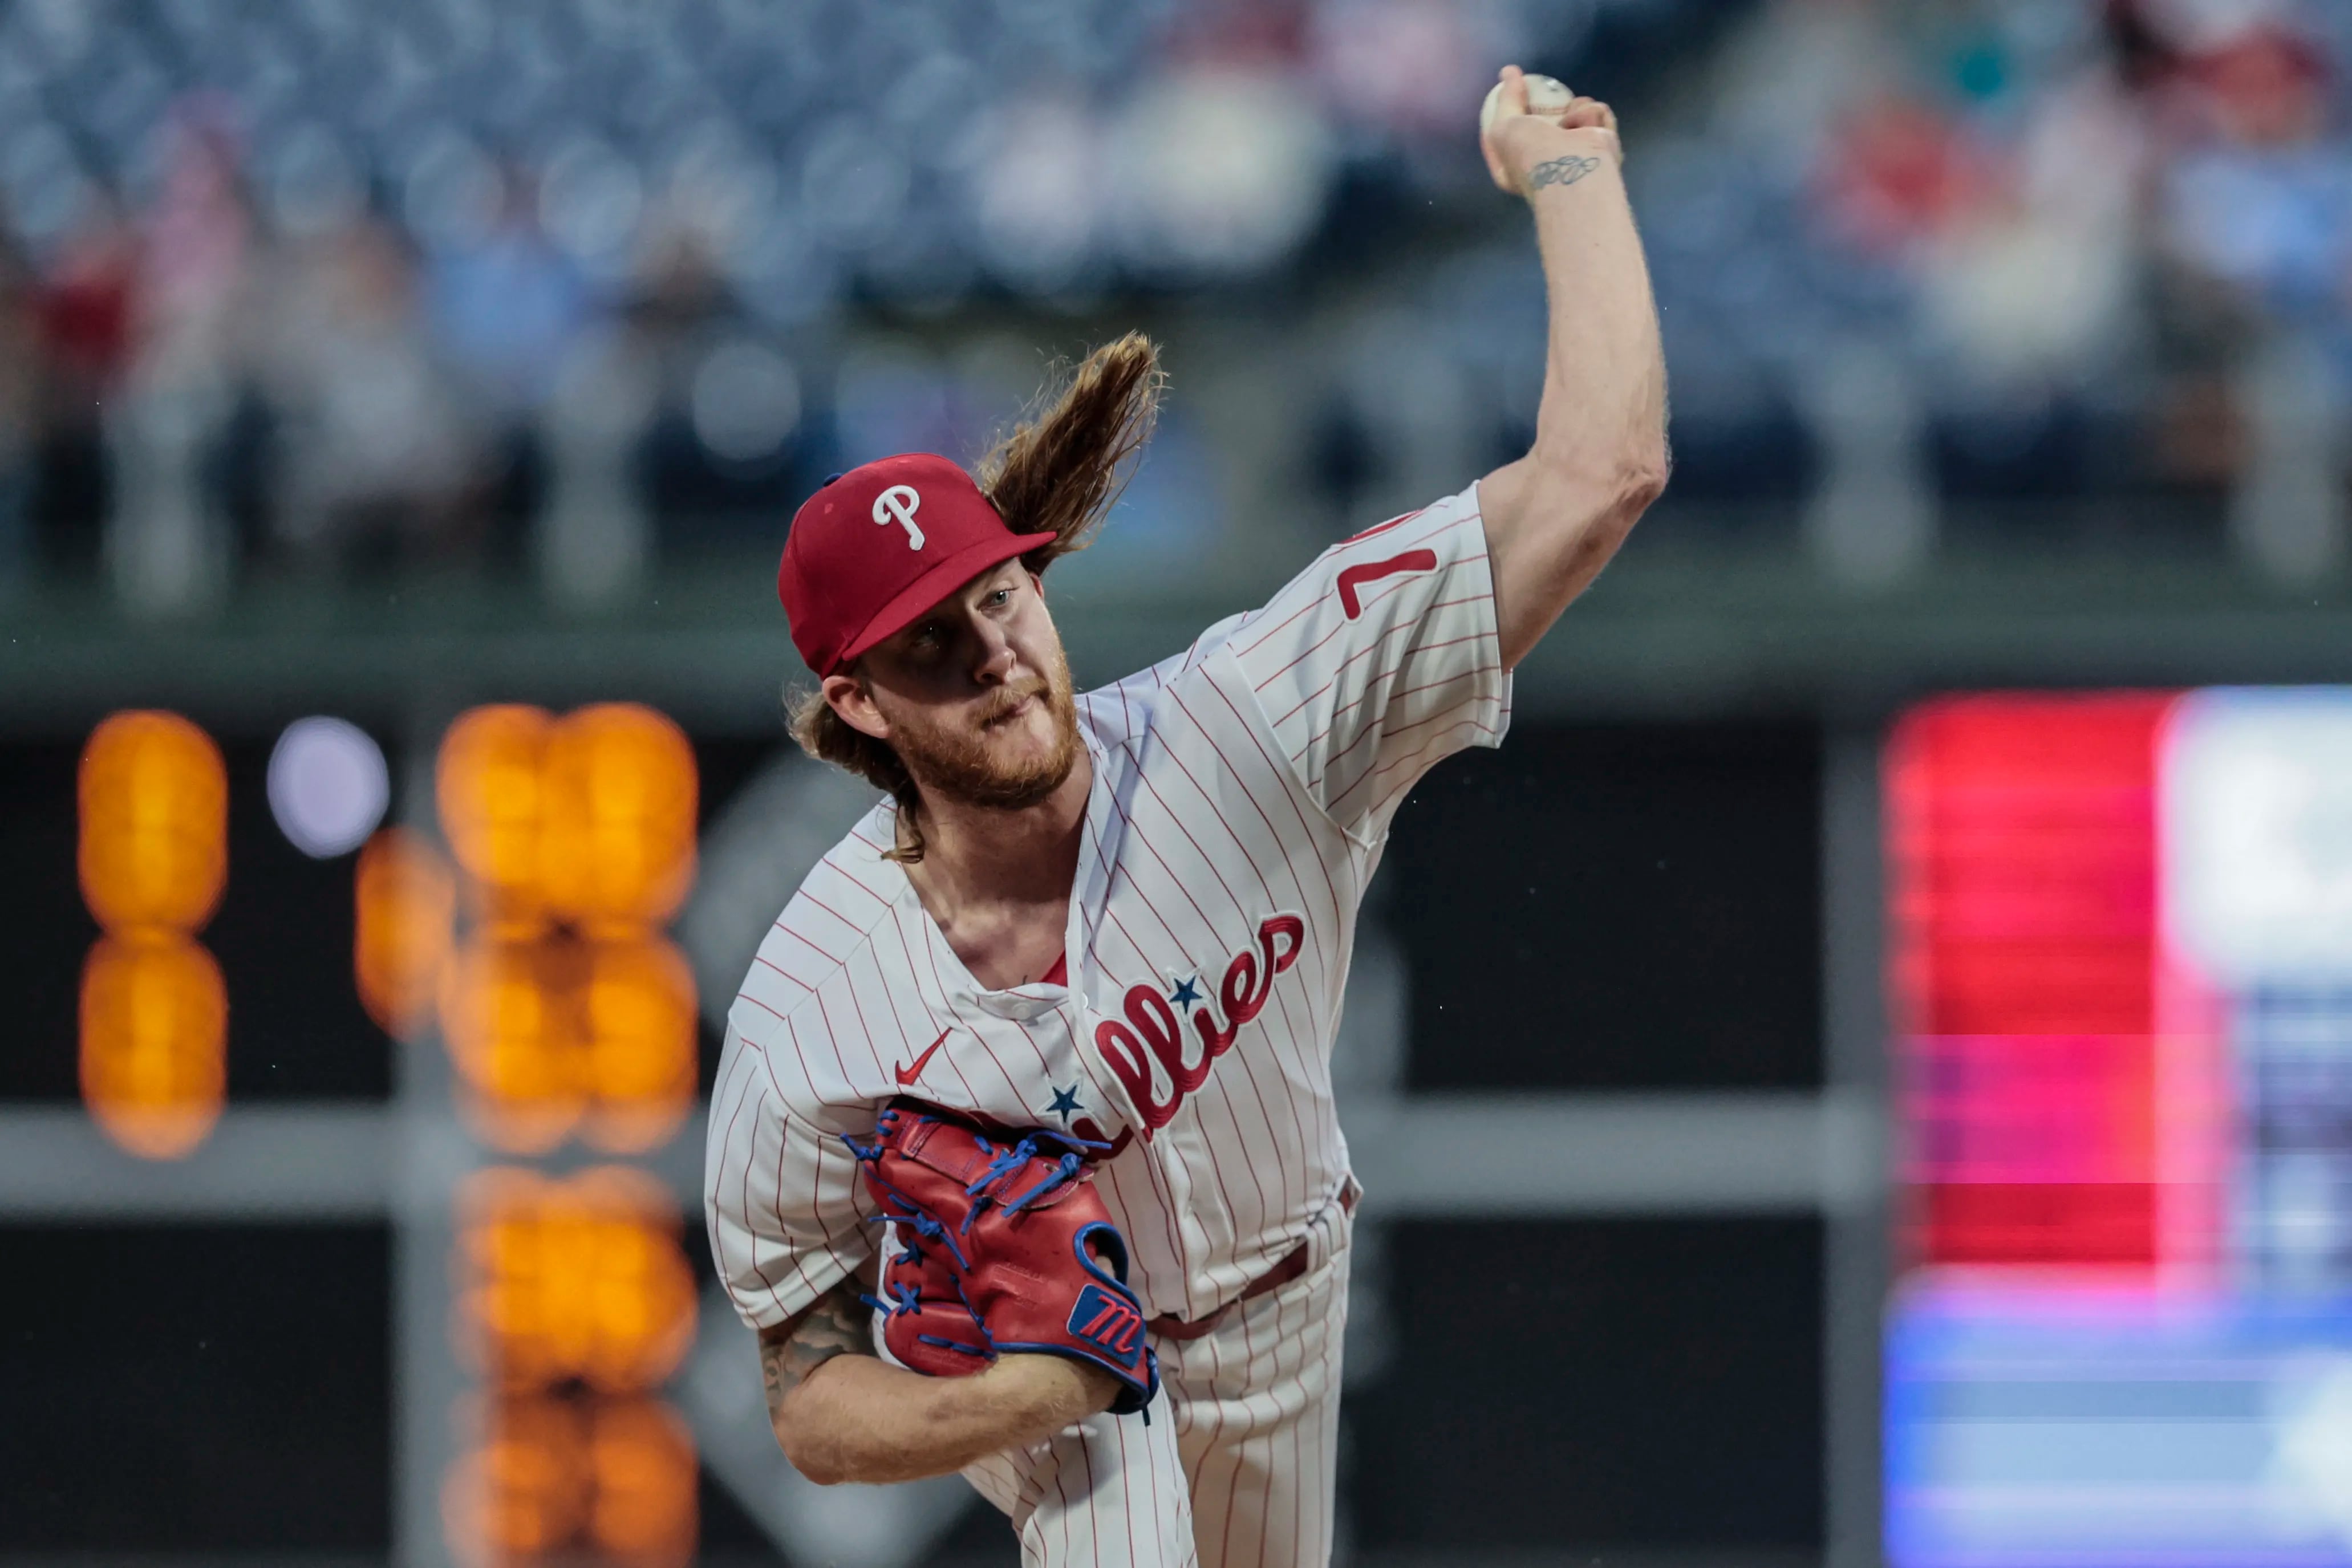 Phillies over the Marlins again